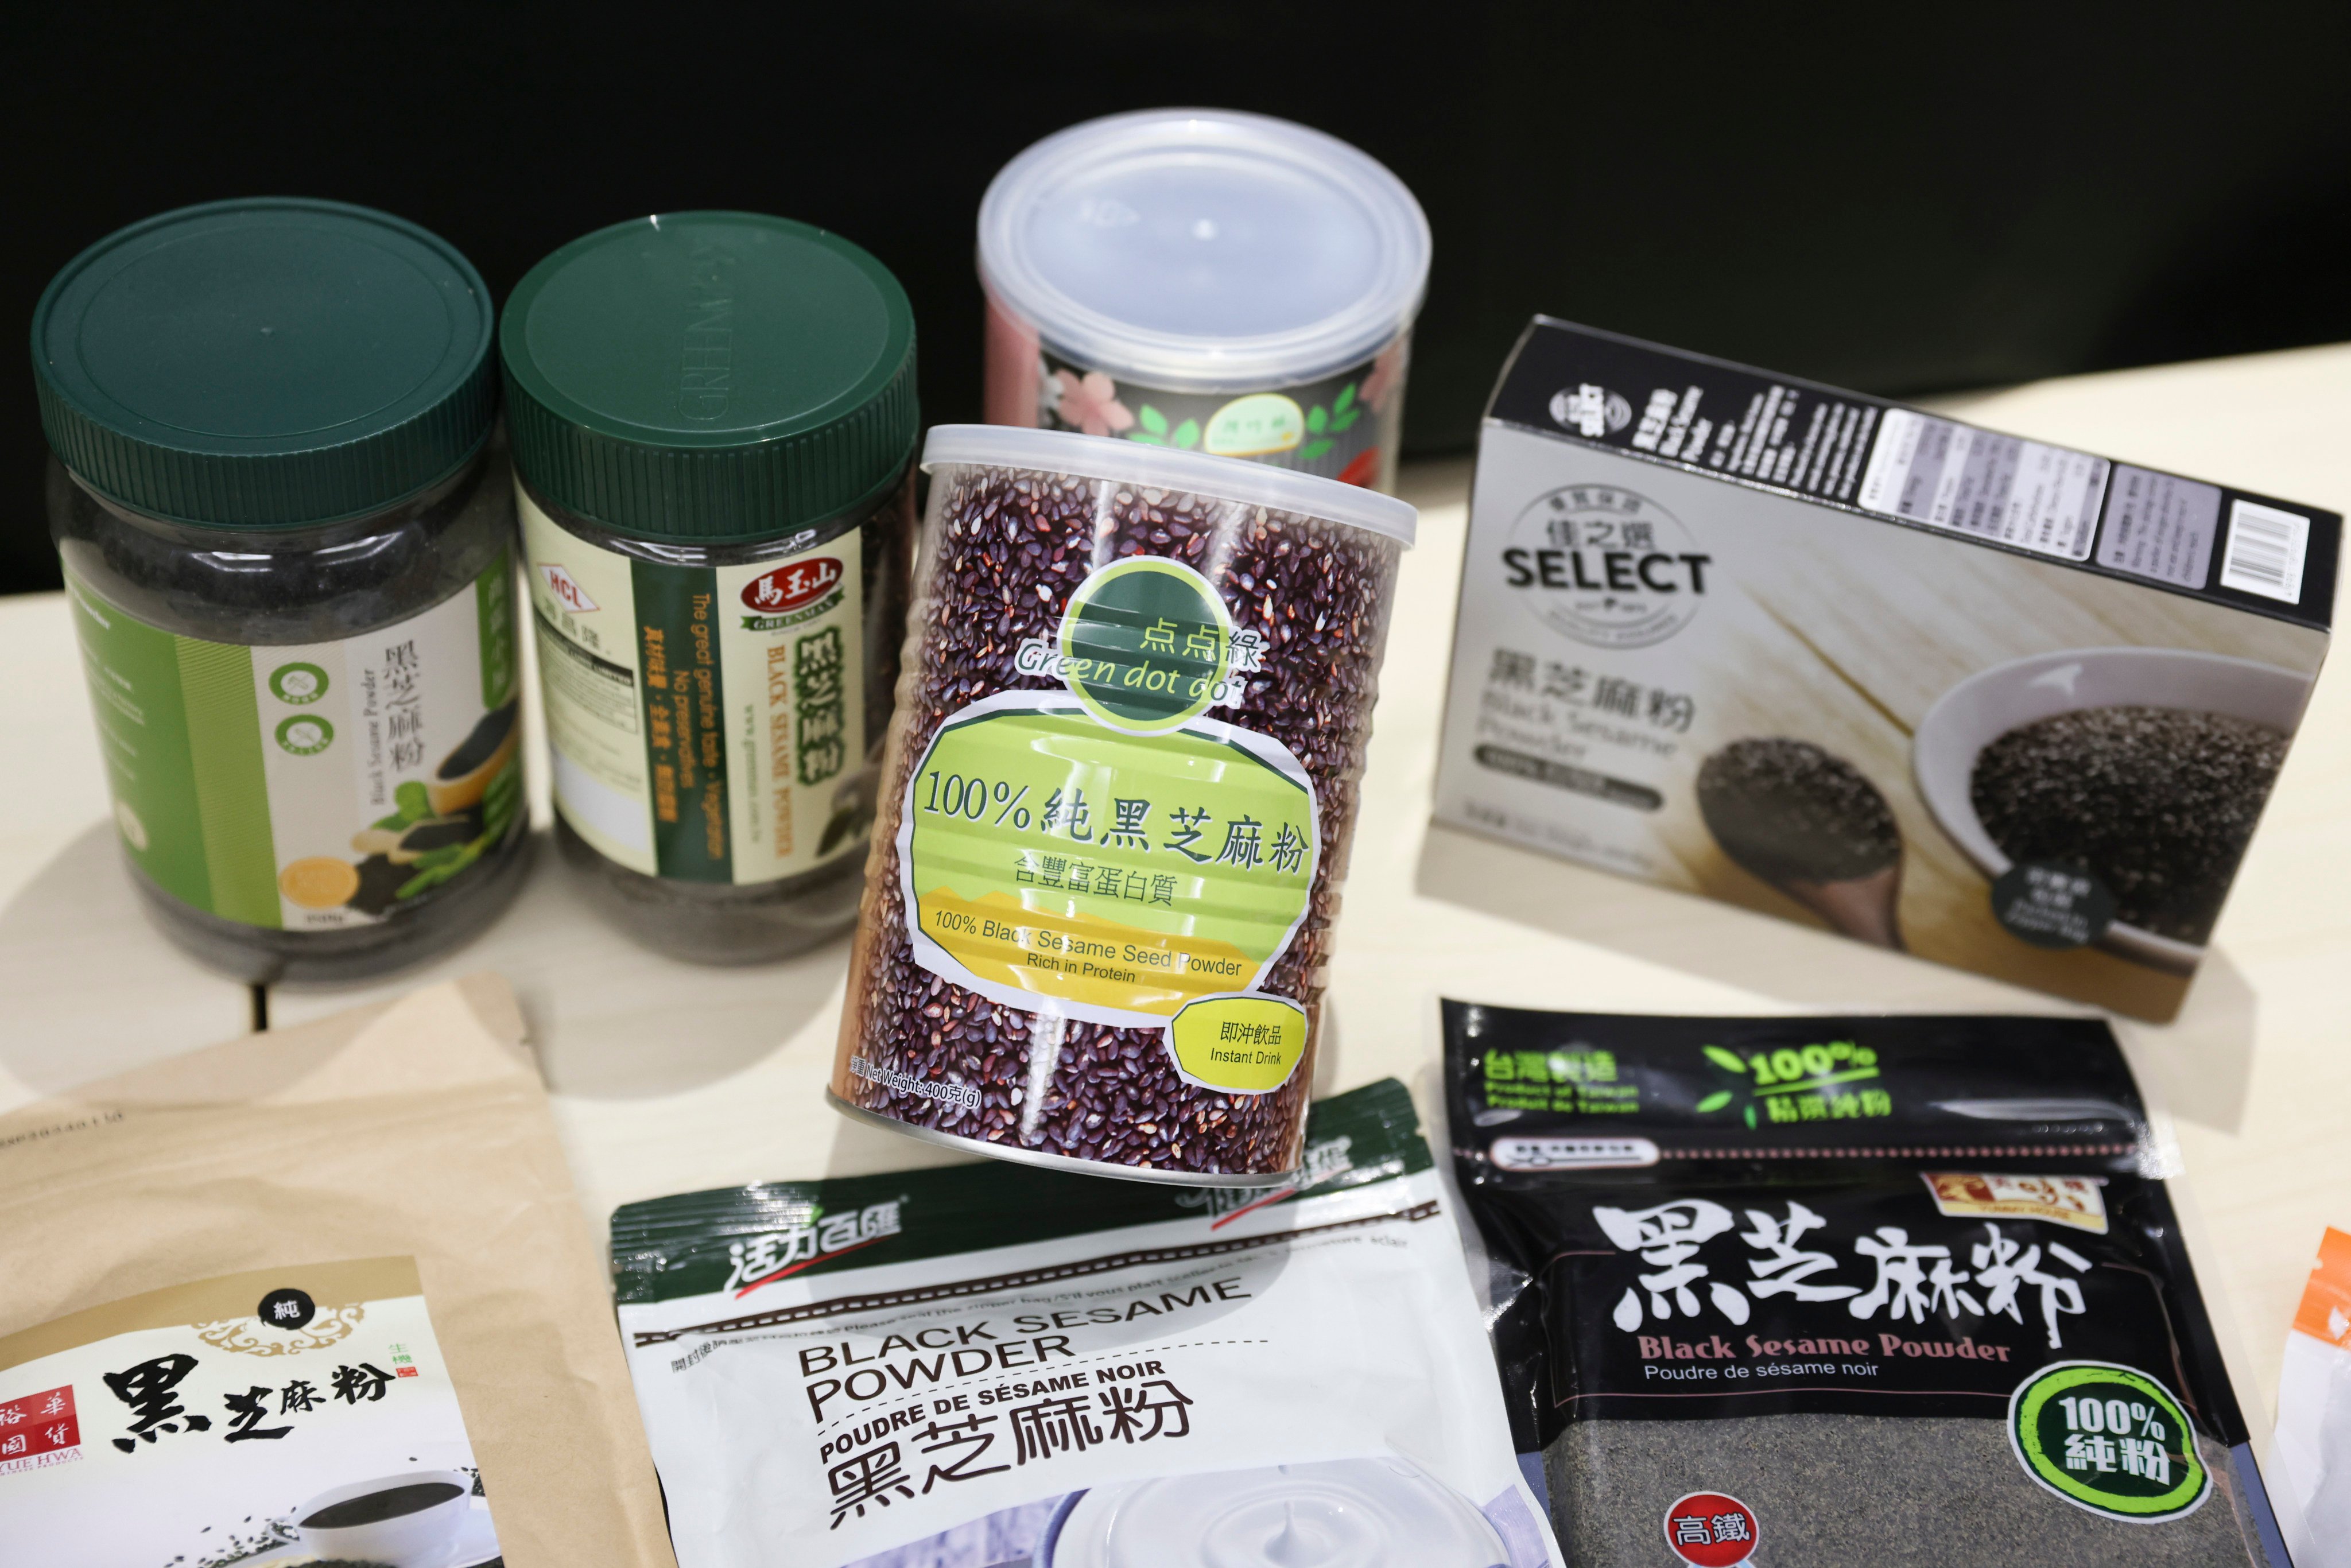 Some of the sesame products tested by the Consumer Council for its latest report. Photo: Yik Yeung-man